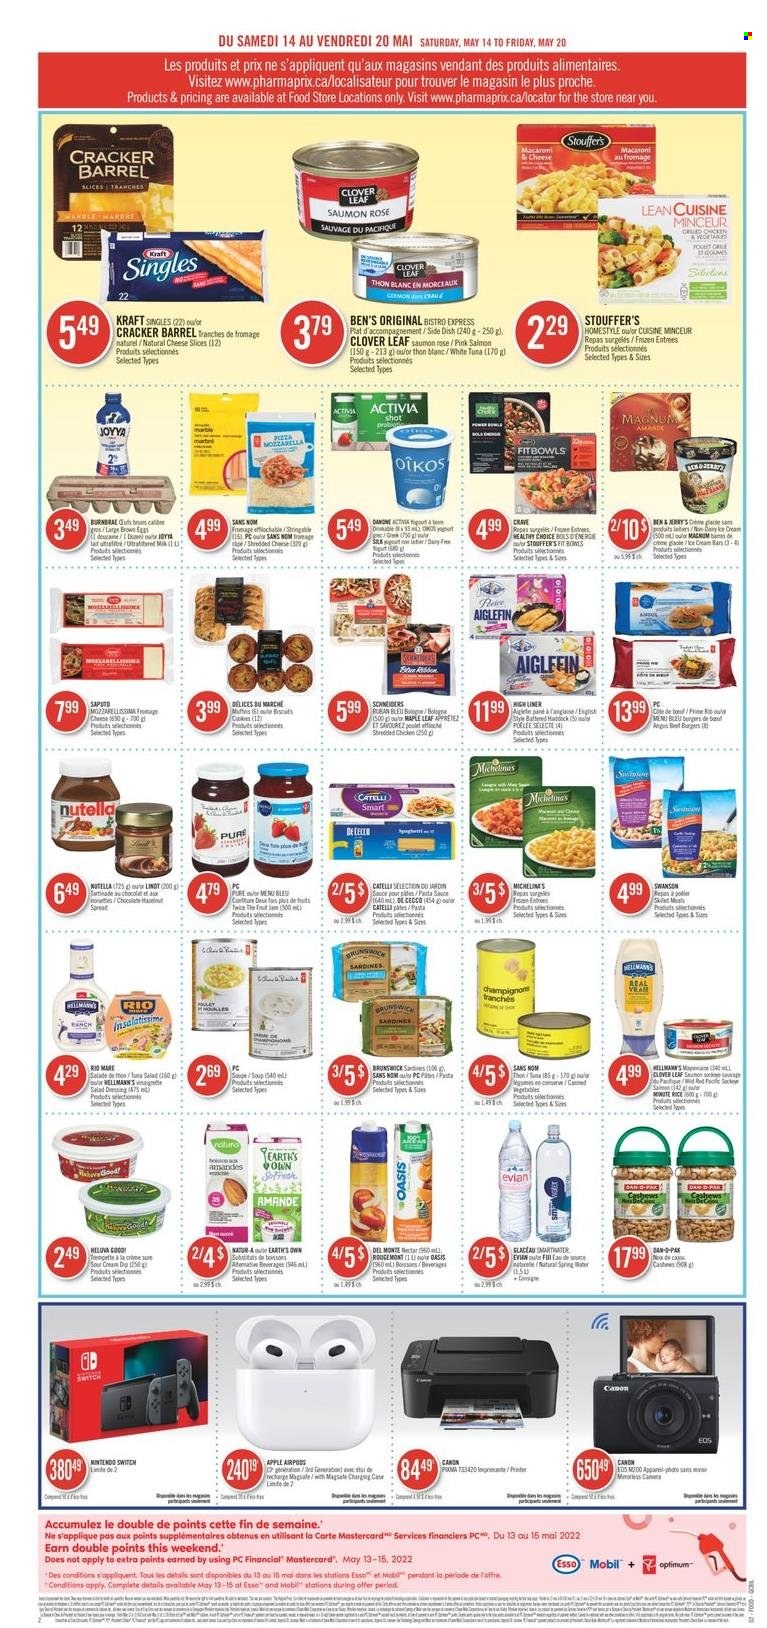 thumbnail - Pharmaprix Flyer - May 14, 2022 - May 20, 2022 - Sales products - Apple, sardines, tuna, macaroni & cheese, pasta sauce, soup, hamburger, sauce, Kraft®, sandwich slices, sliced cheese, Kraft Singles, Clover, Activia, Oikos, dip, Magnum, Stouffer's, cookies, chocolate, crackers, fruit jam, cashews, switch, Oros, Evian, rosé wine, pot, pen, Airpods, rose, Canon, mozzarella, Nutella, Danone, Lindt. Page 5.